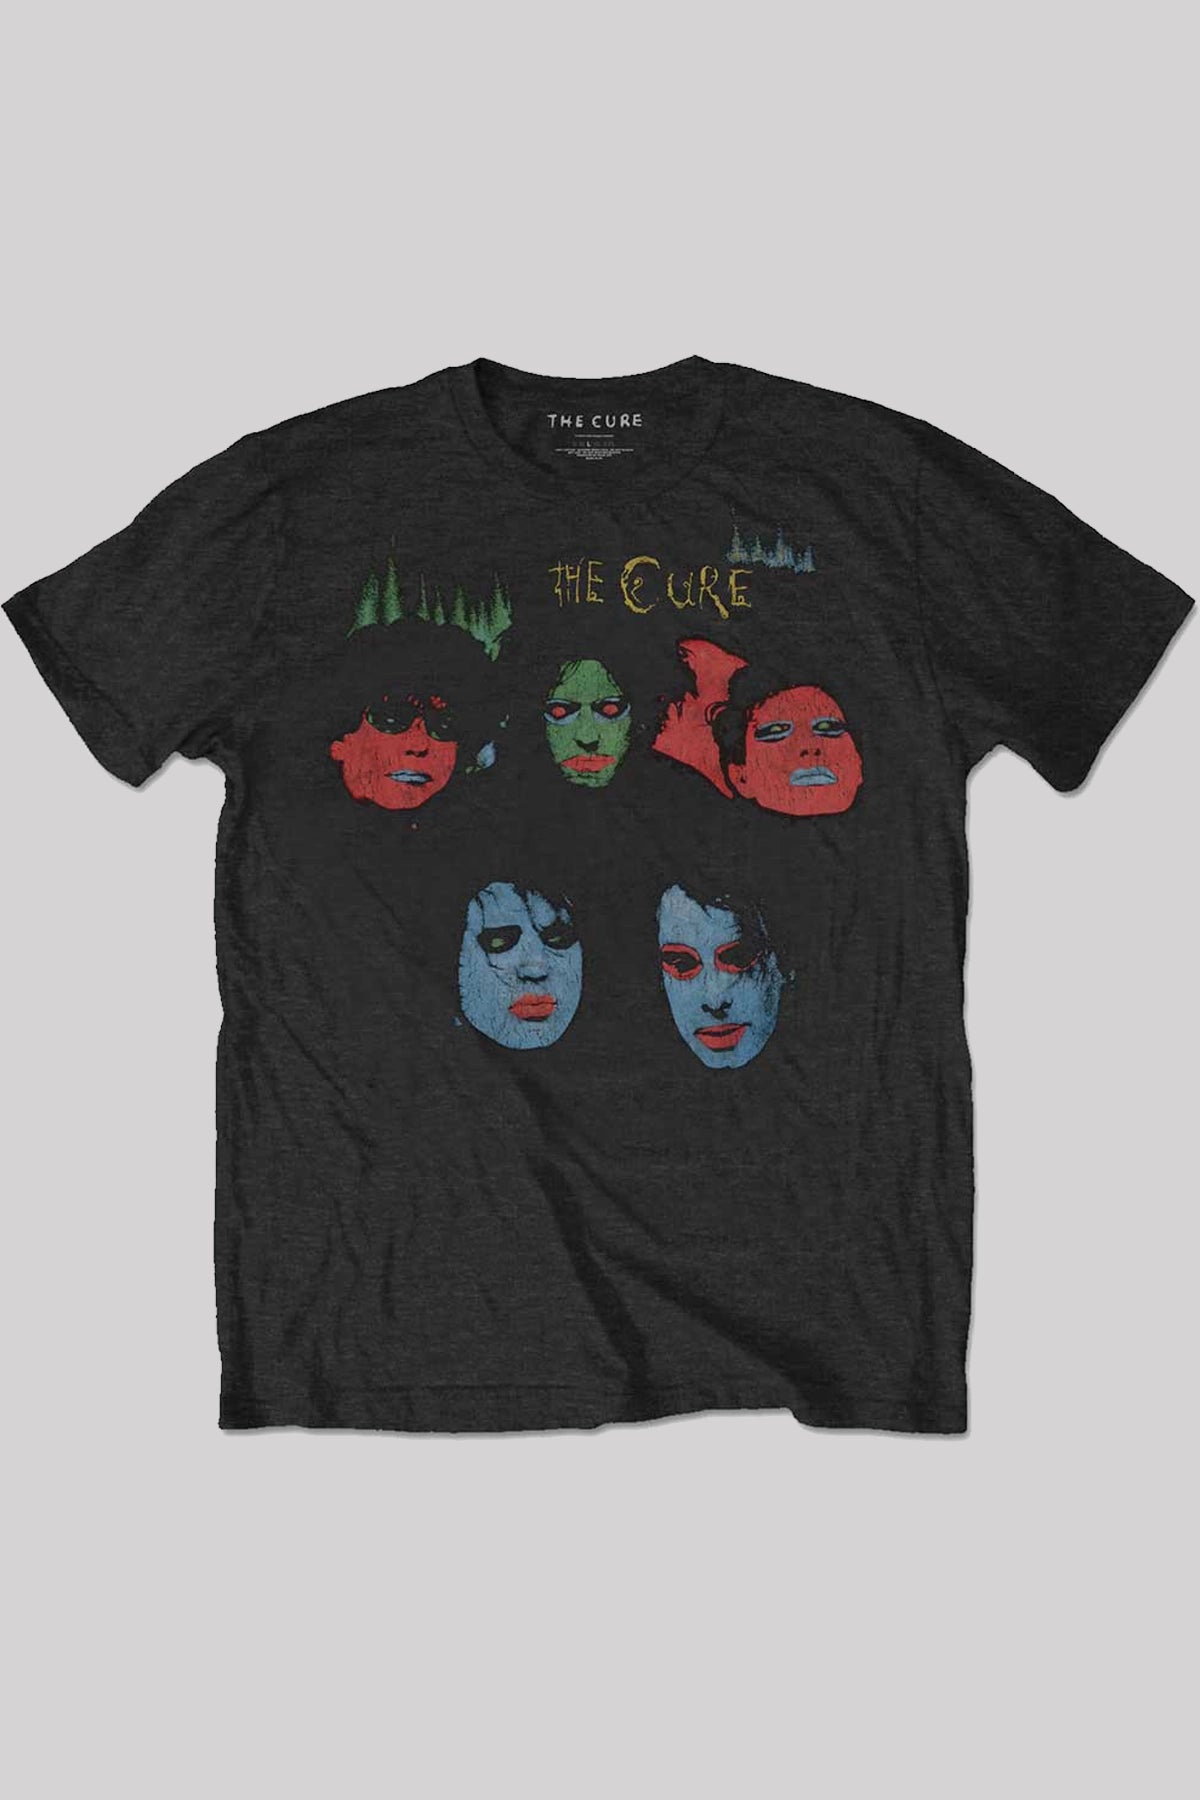 The Cure In Between Days Unisex T-Shirt